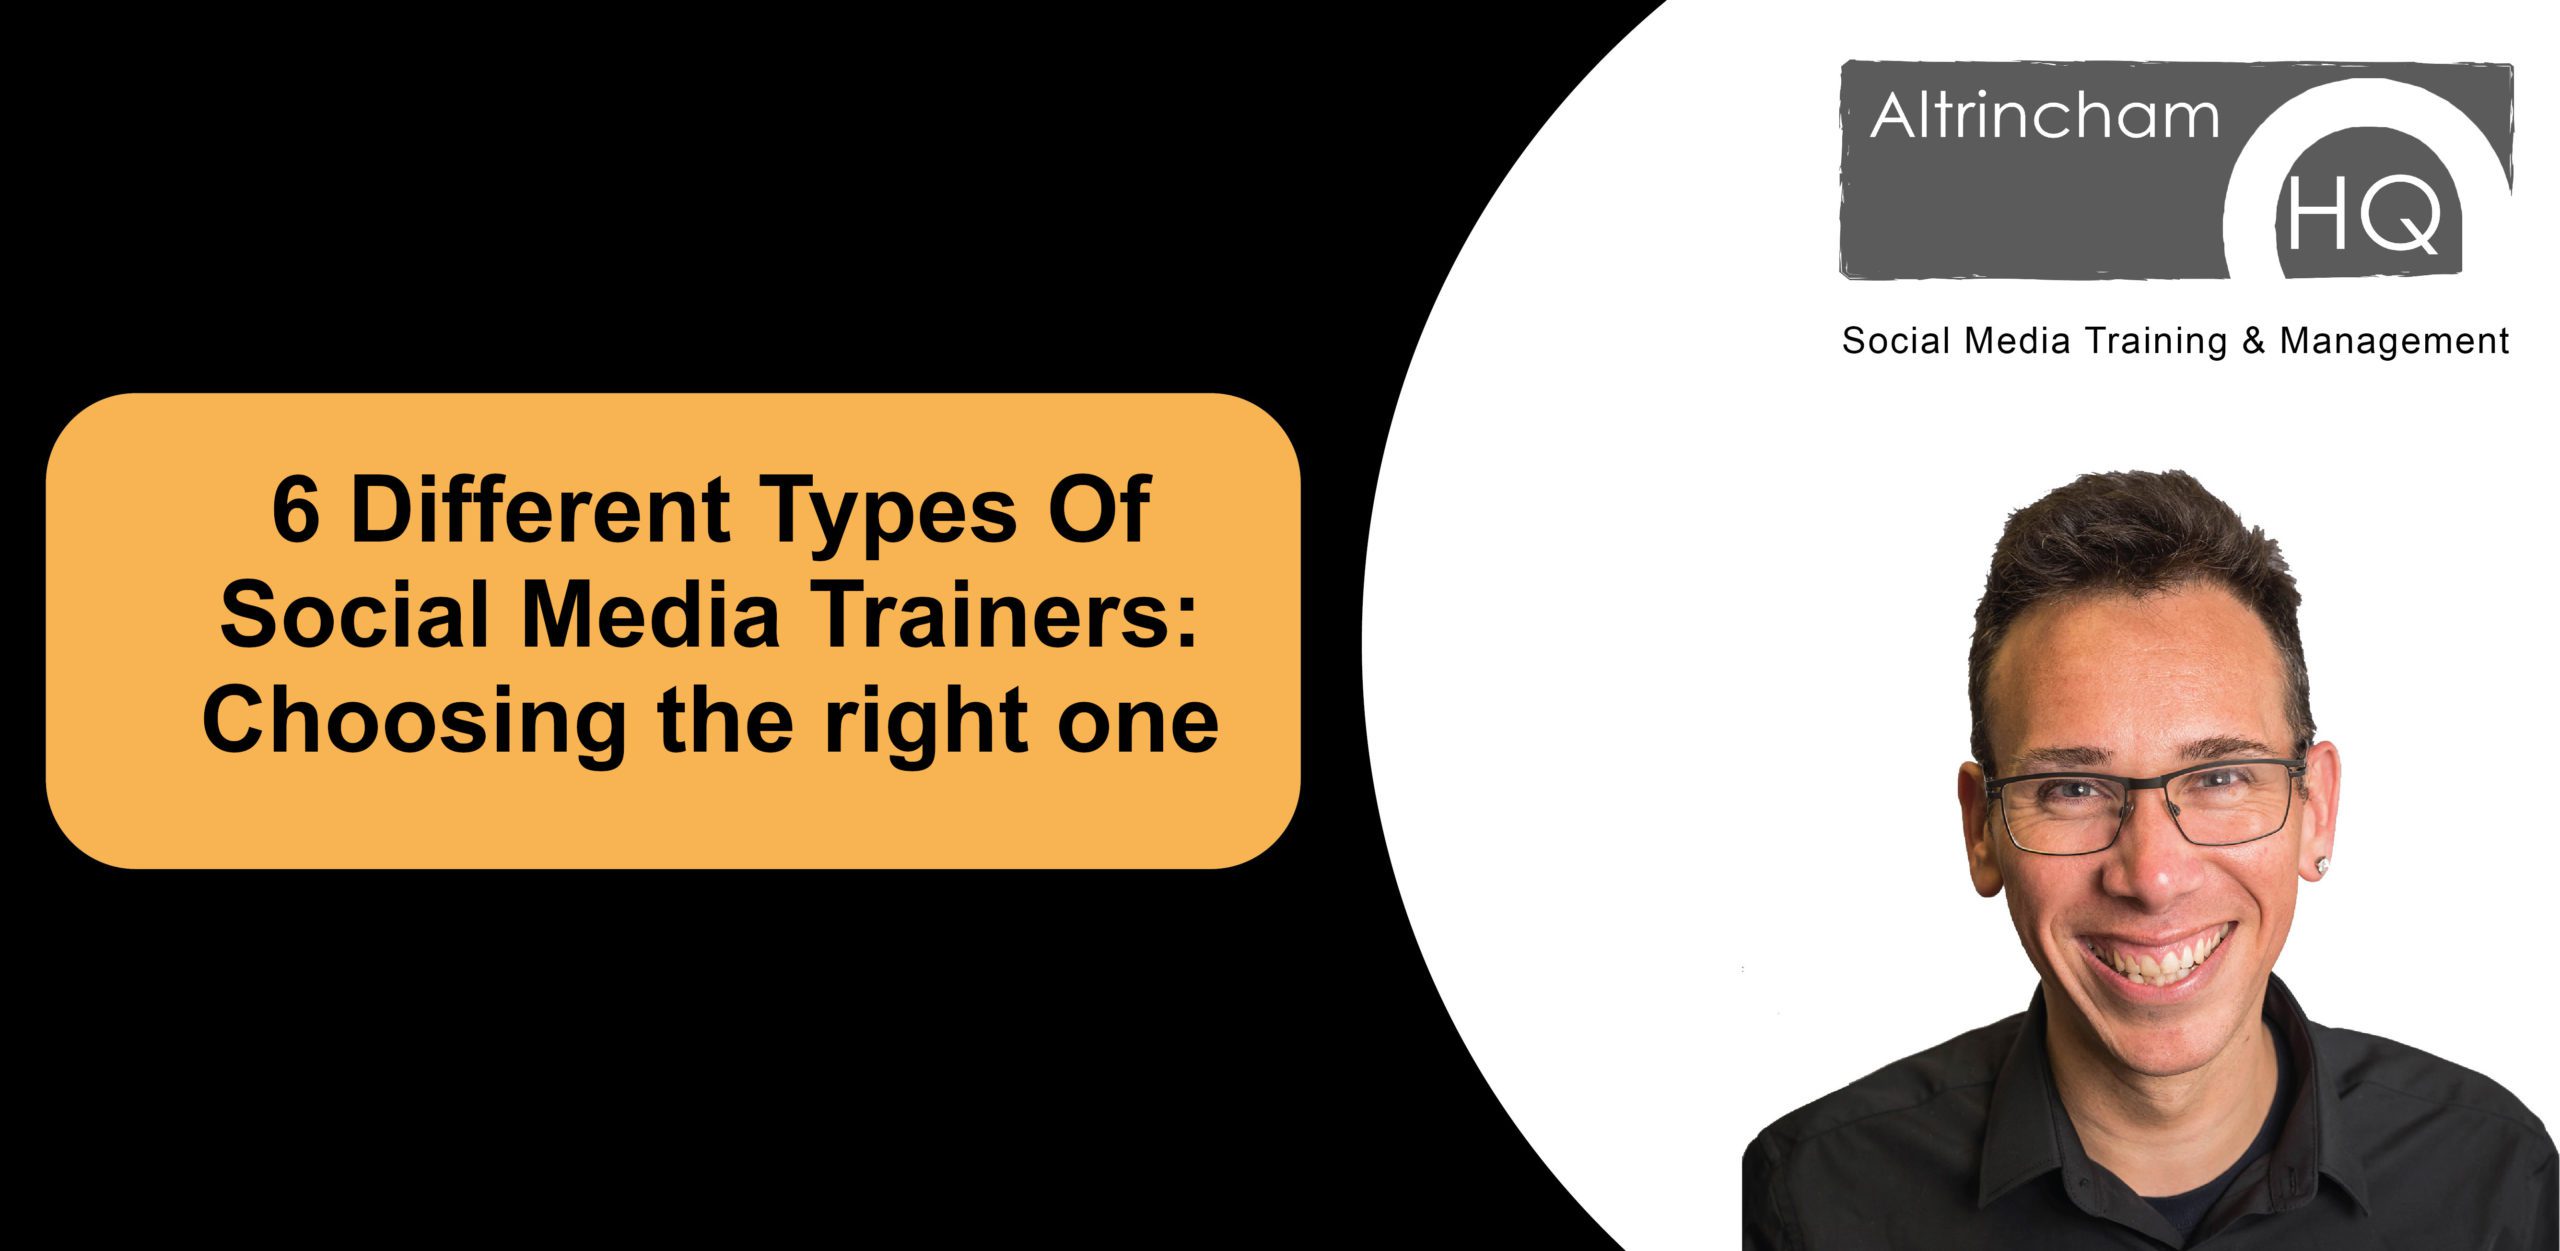 6 Different Types Of Social Media Trainers: How To Choose